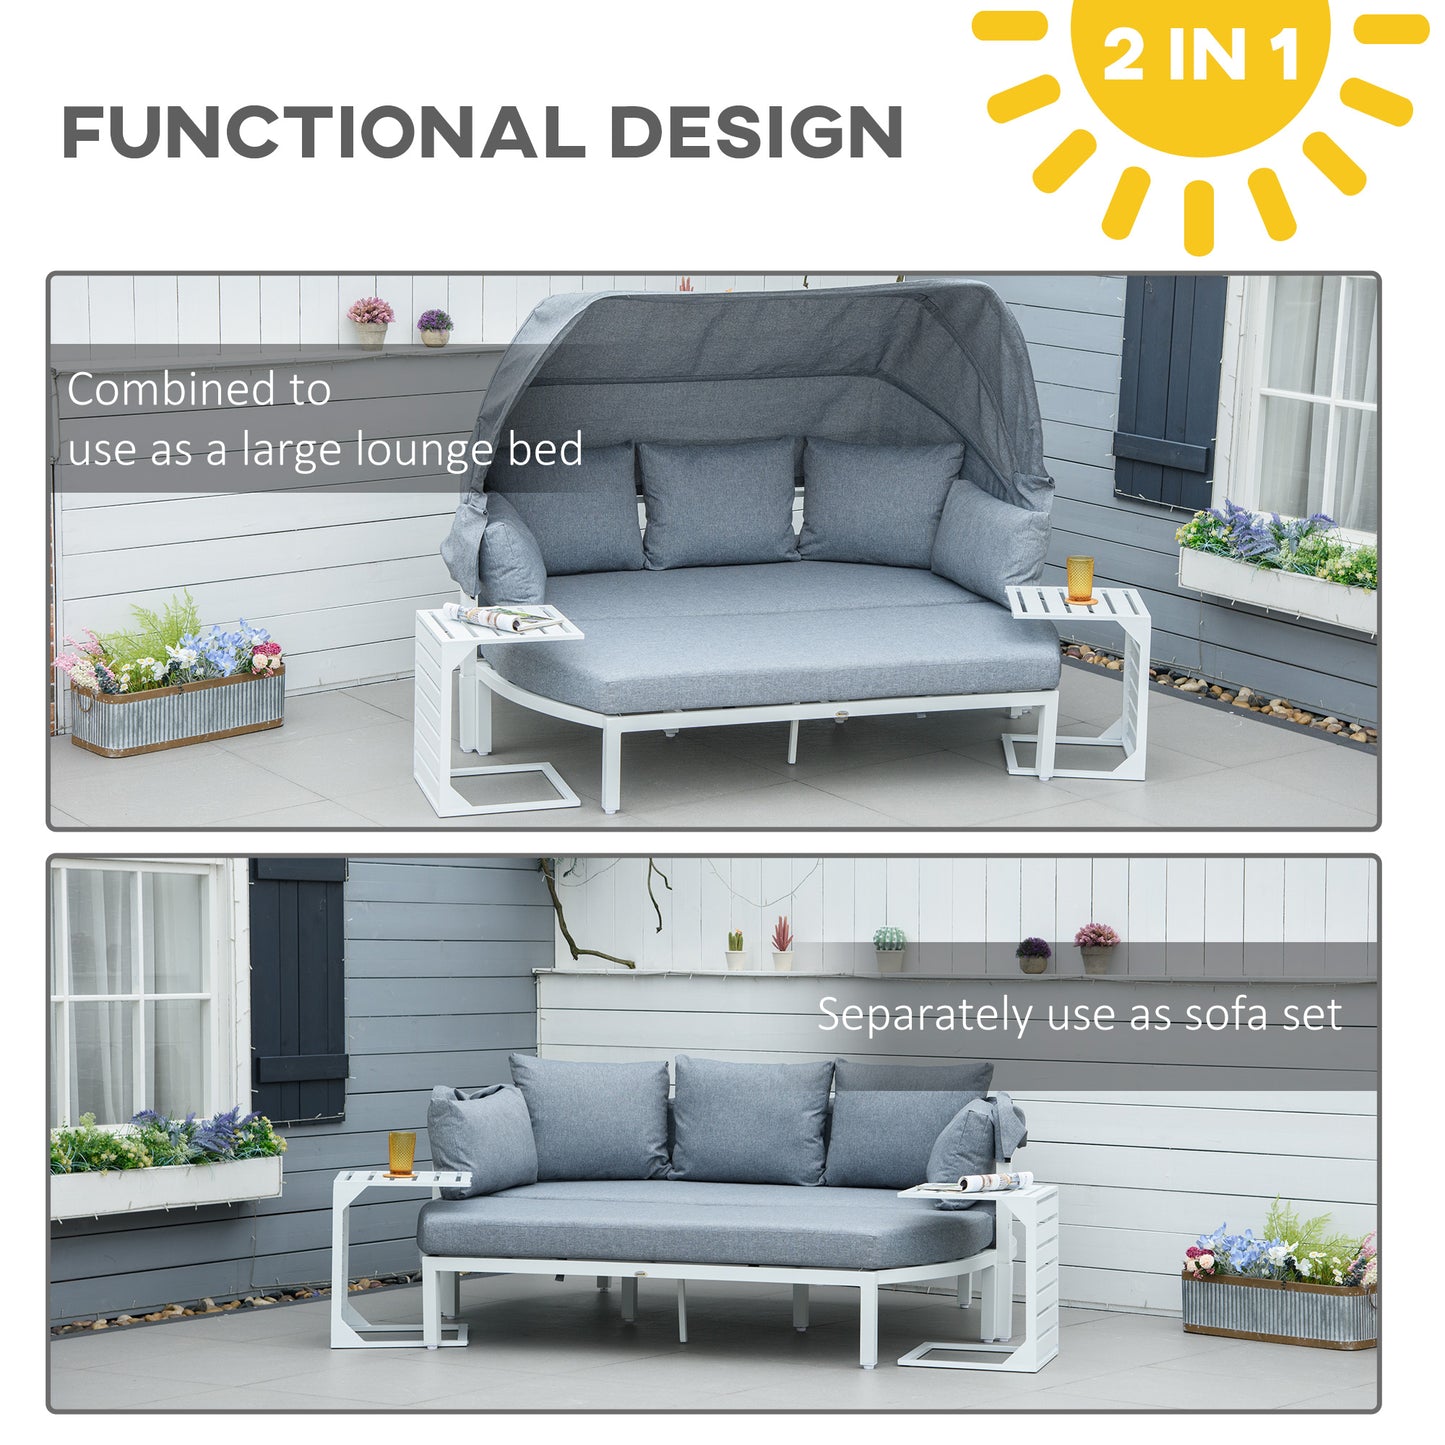 Outsunny 4 Pieces Outdoor Garden Sofa Set, Aluminum Patio Lounge Bed Furniture Set, with Canopy, Padded Cushions & Side Tables, White